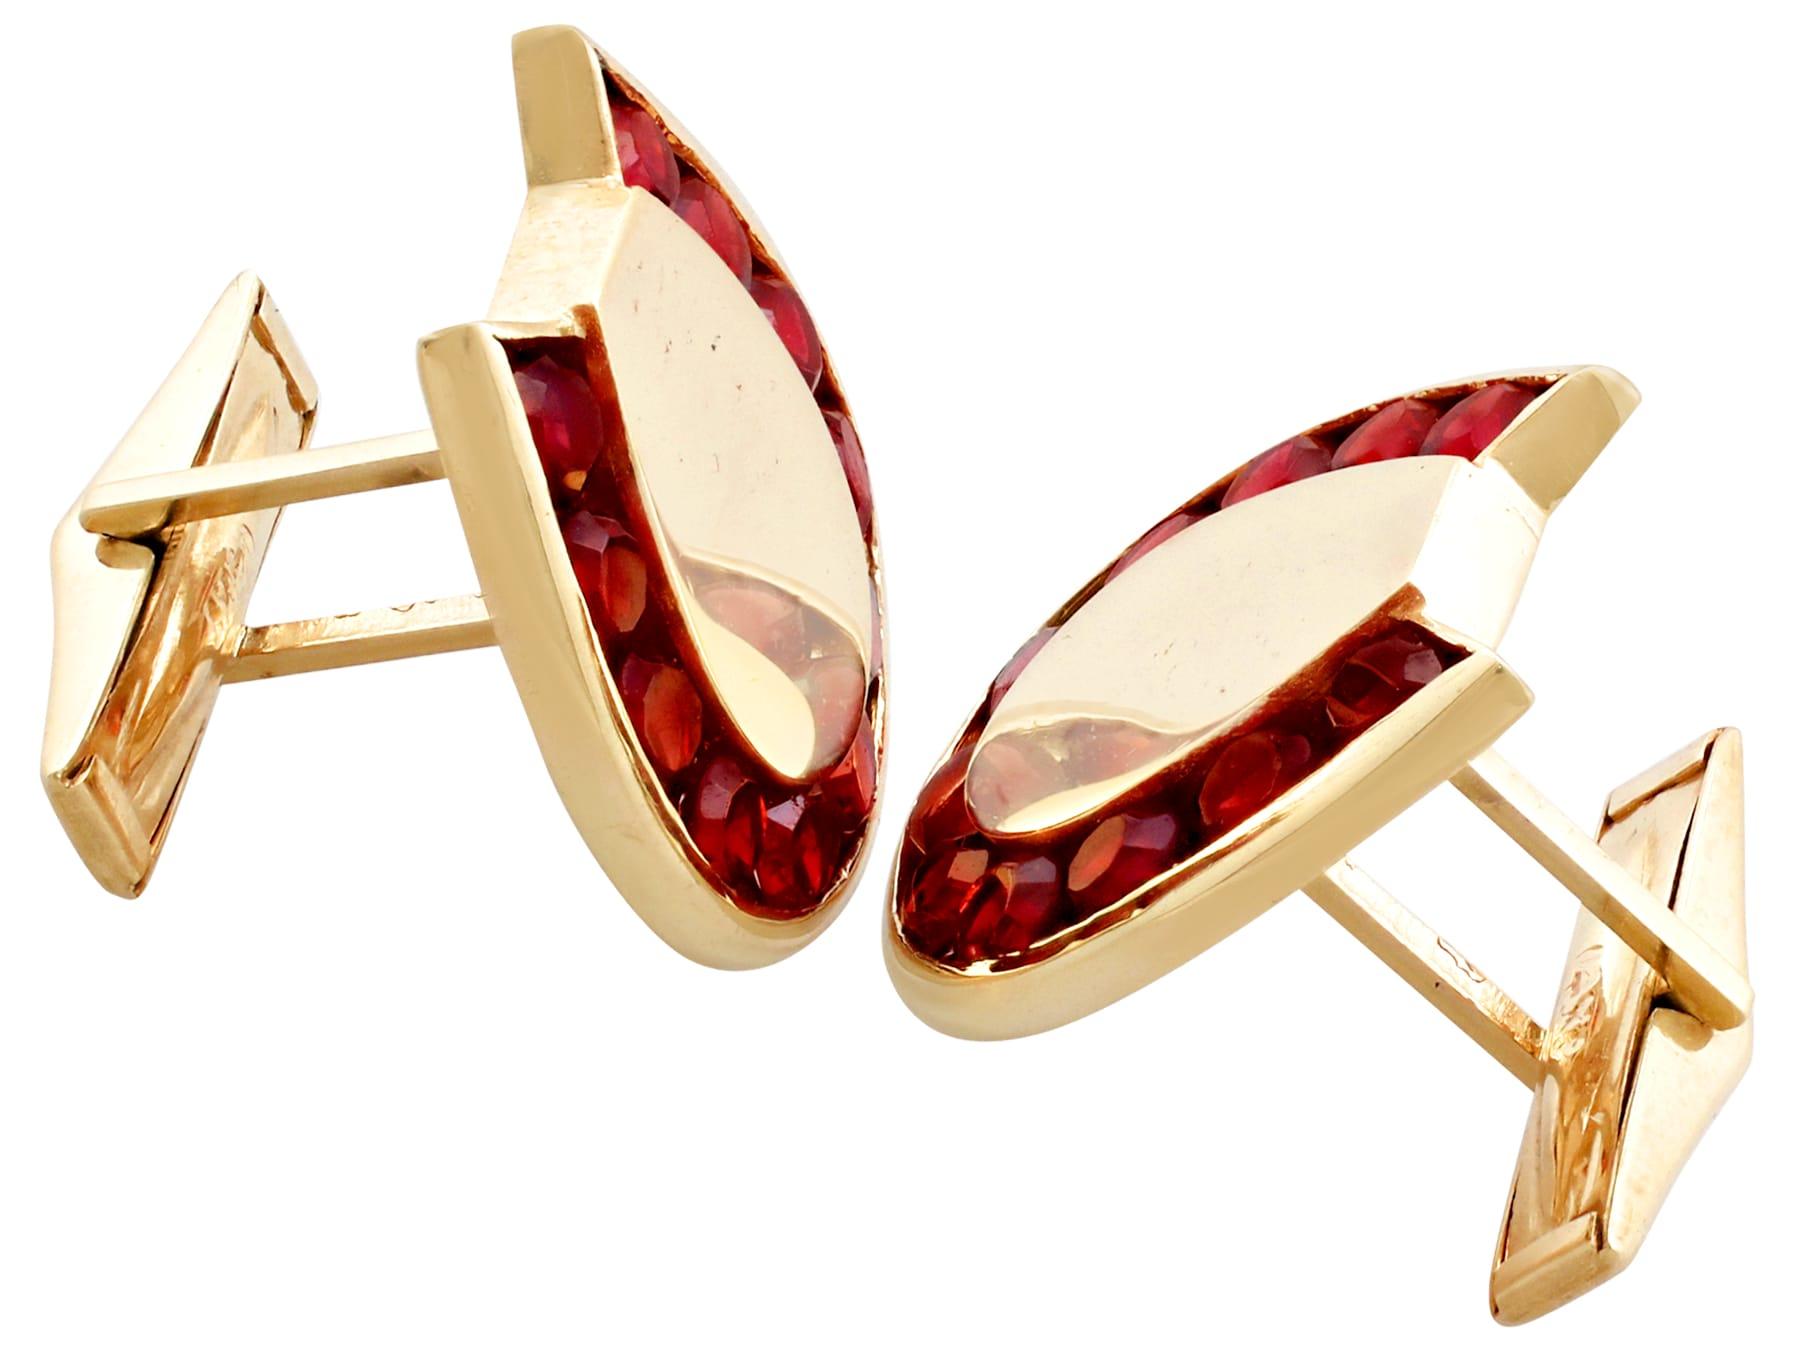 Vintage 1950s 3.82 Carat Garnet and Yellow Gold Horseshoe Cufflinks In Excellent Condition For Sale In Jesmond, Newcastle Upon Tyne